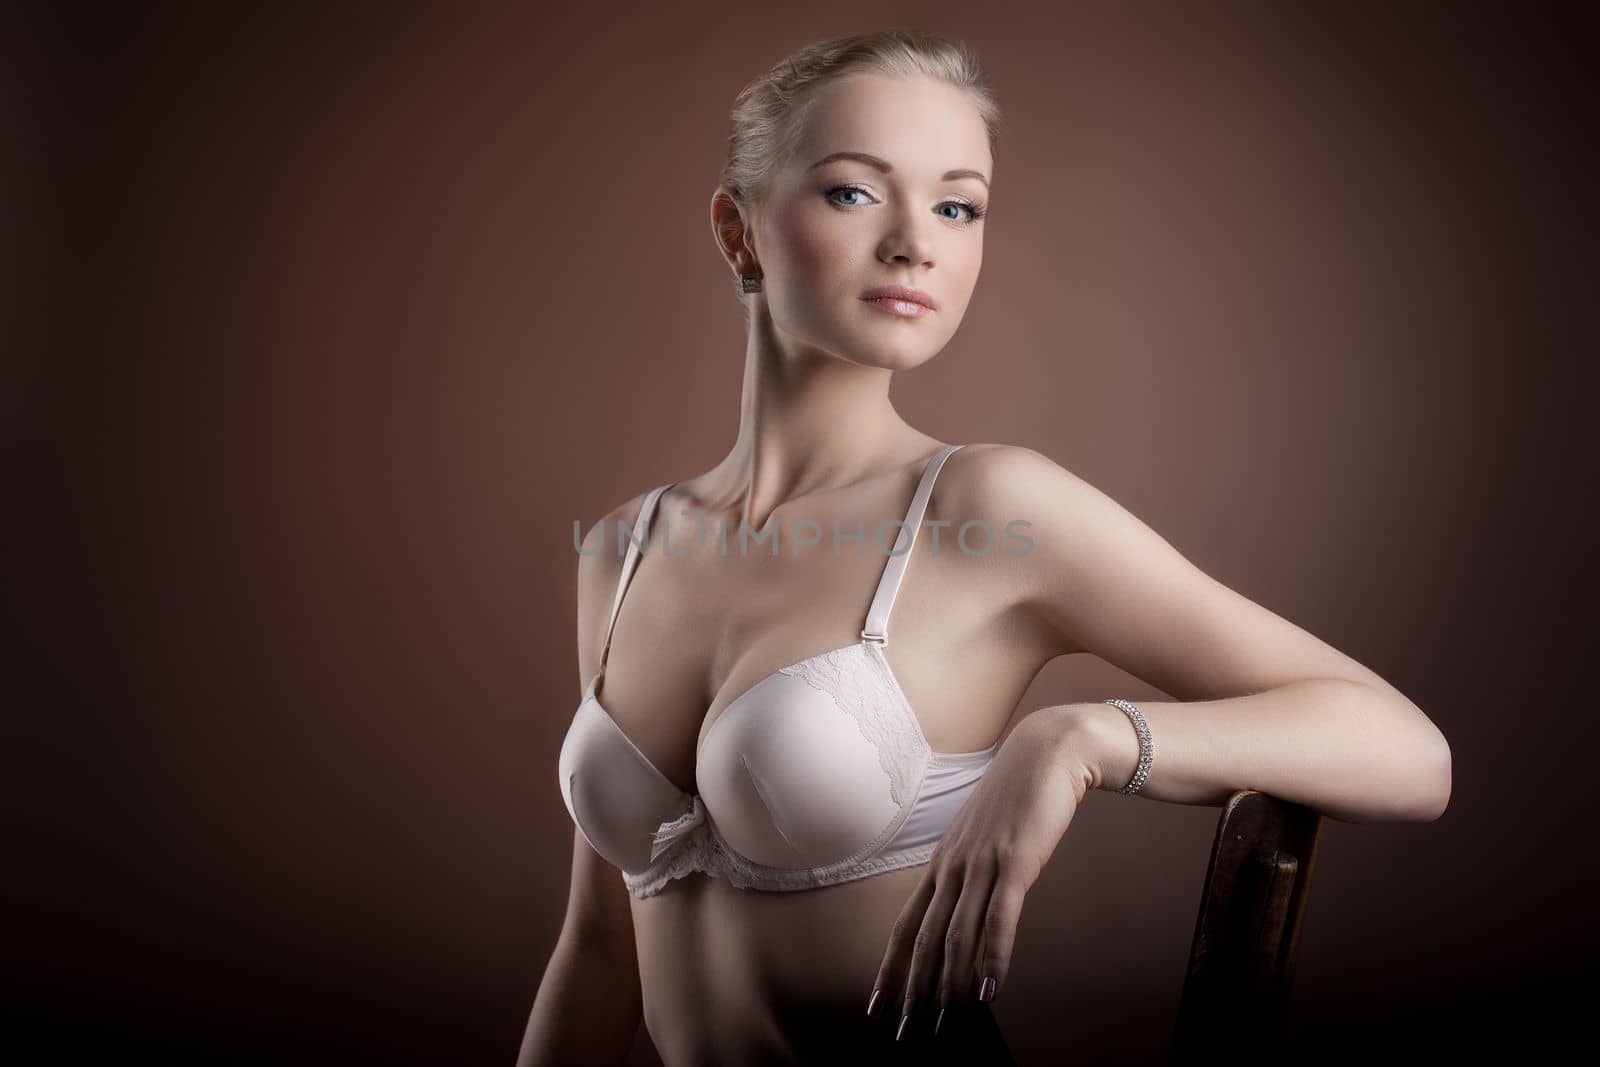 Beautiful woman portrait in white bra on brown background